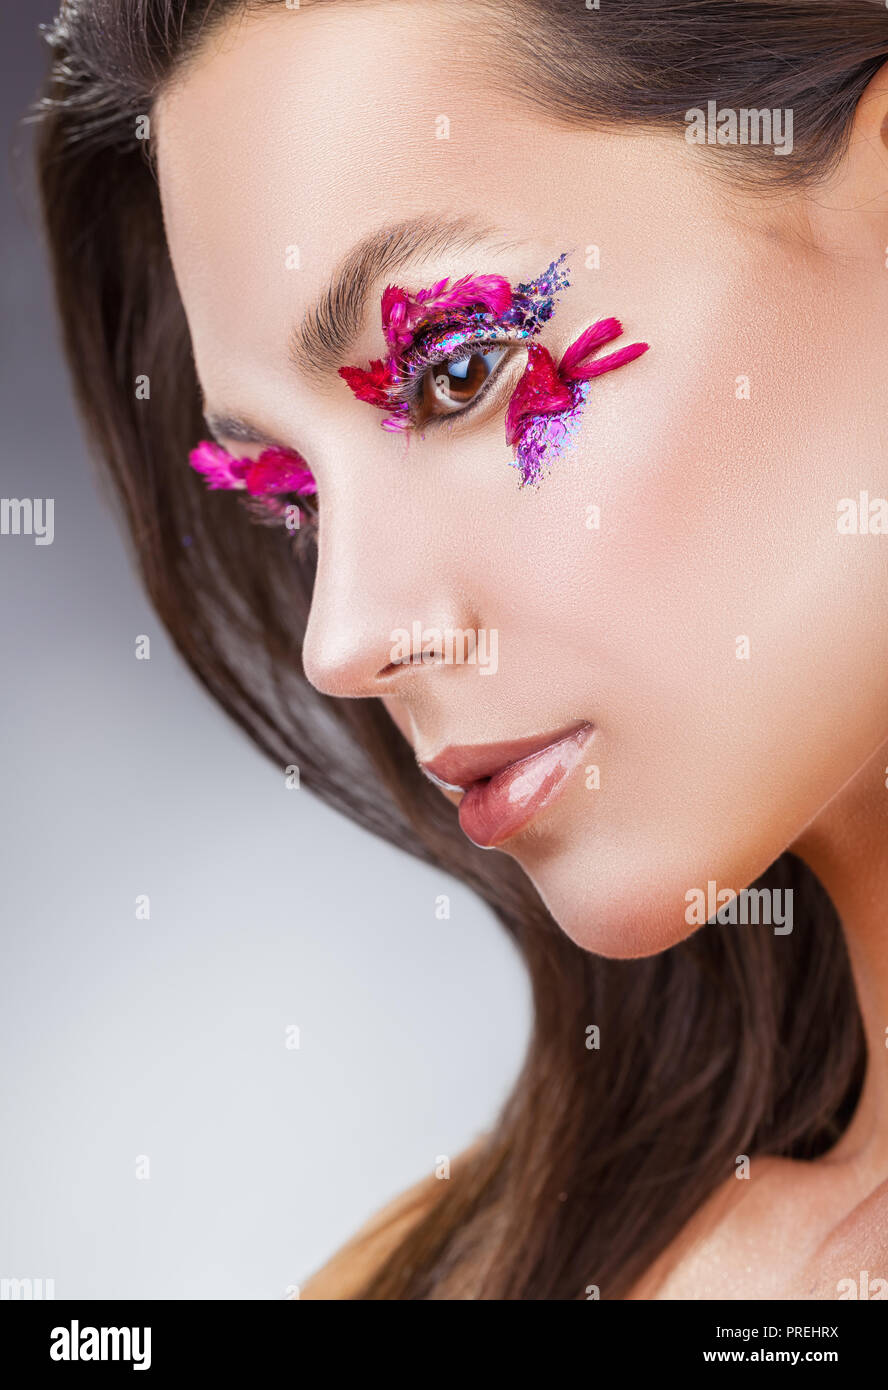 Beautiful young woman with fashion makeup against a gray background Stock Photo